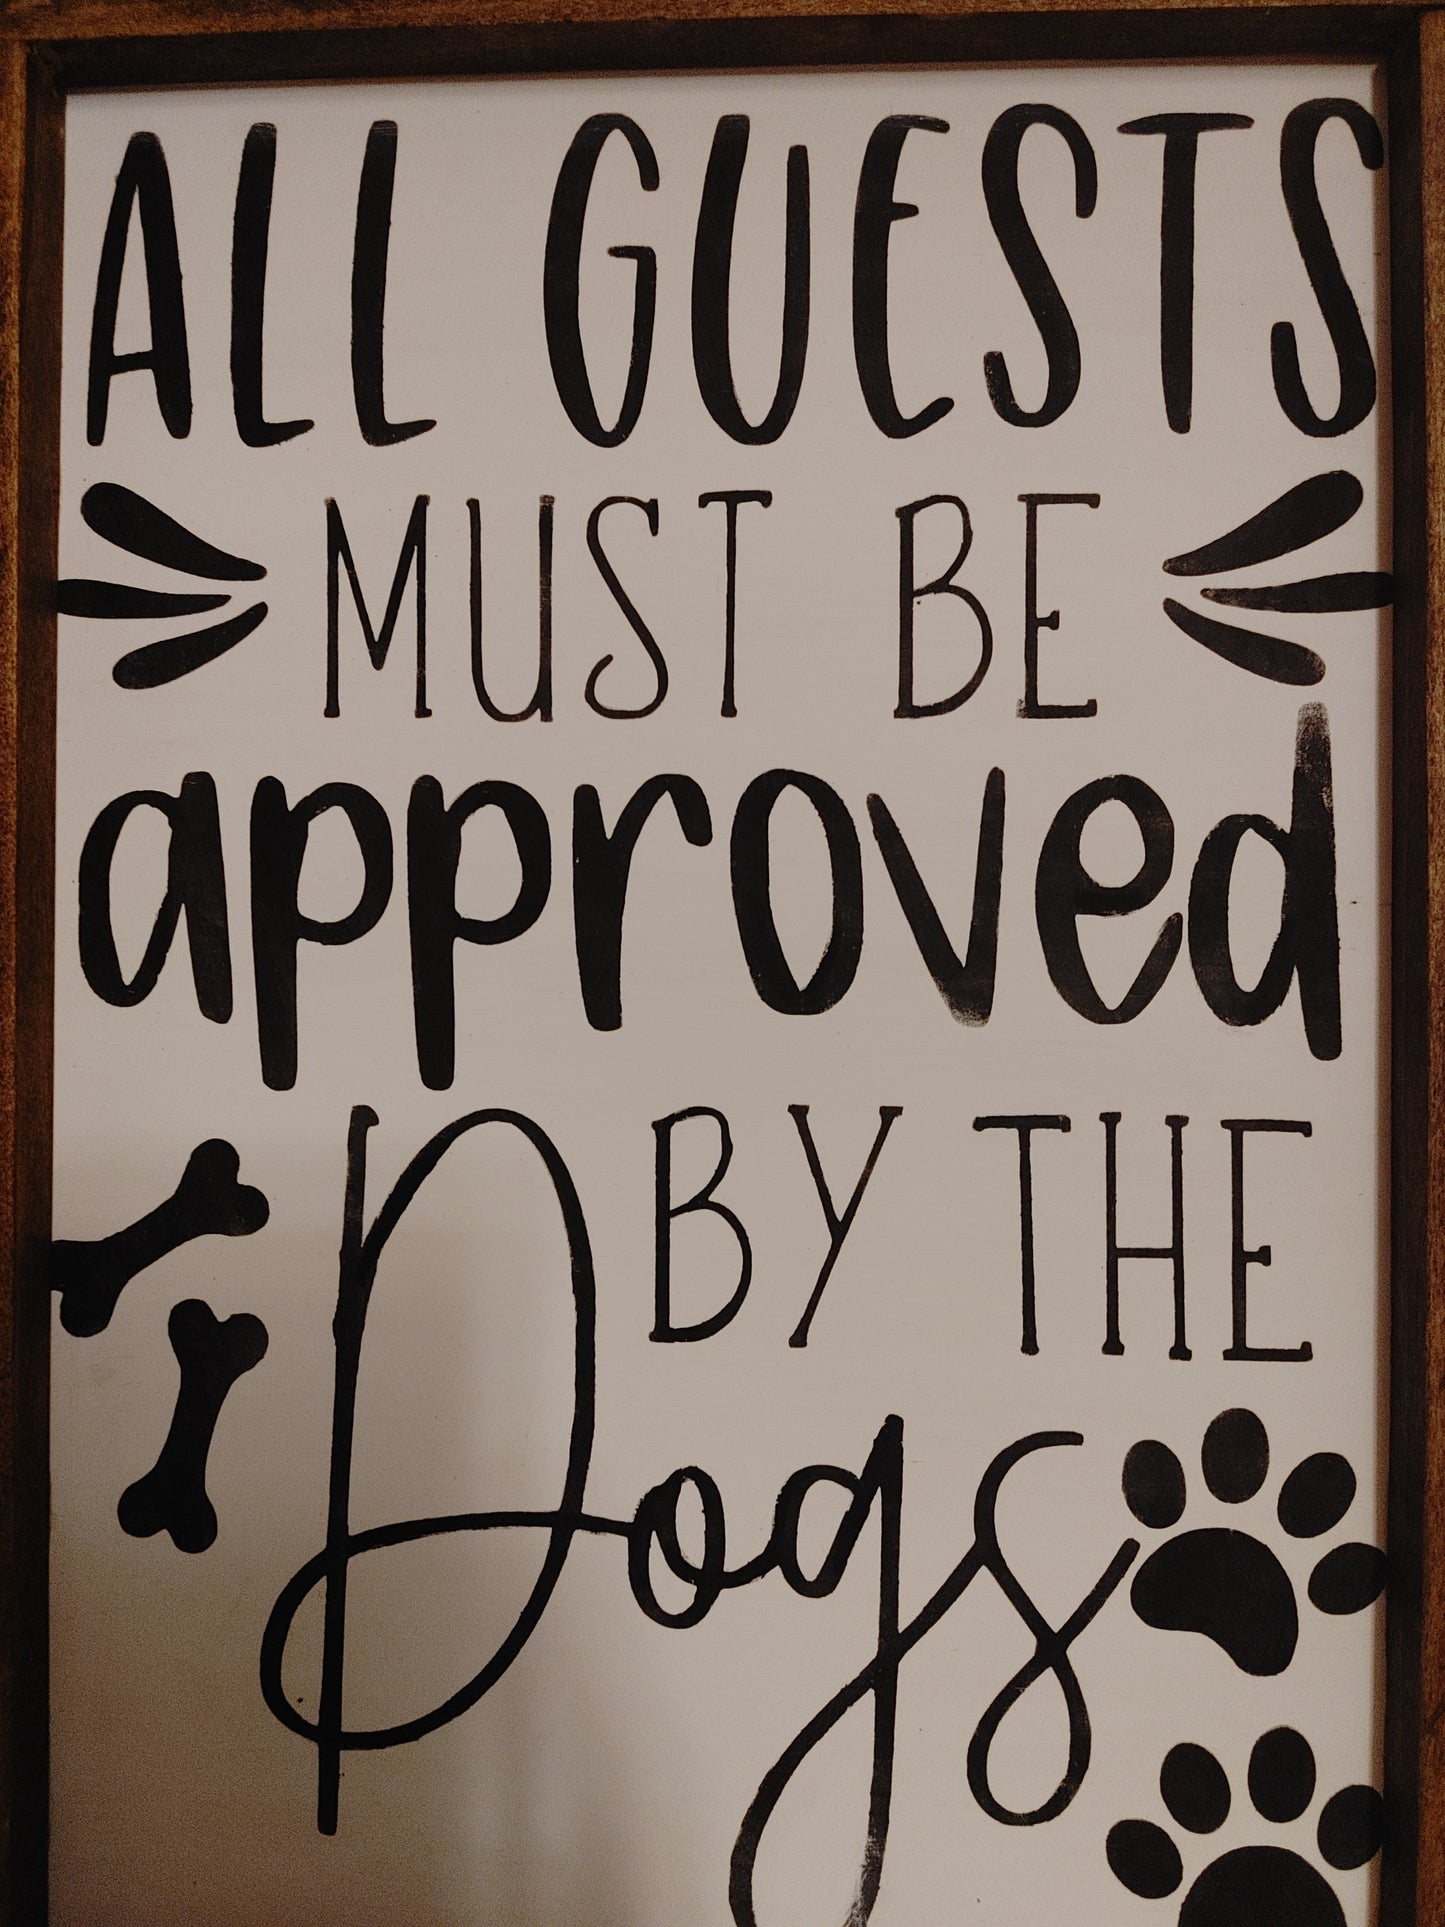 All guests must be approved by the dogs Sign